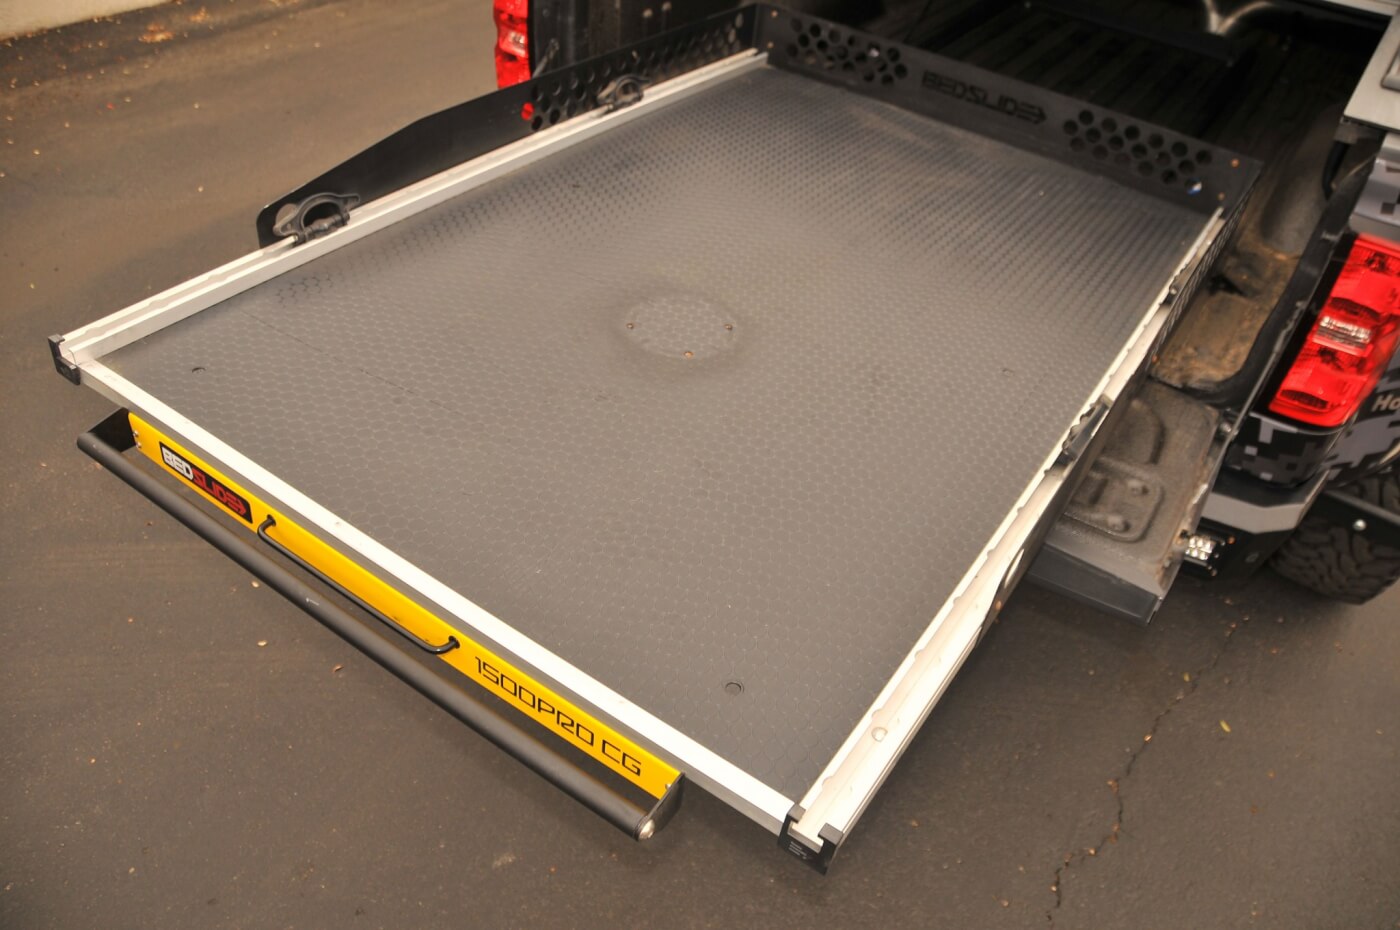 The BedSlide 1500 Pro CG allows Fromm to load and unload the bed with minimal effort.